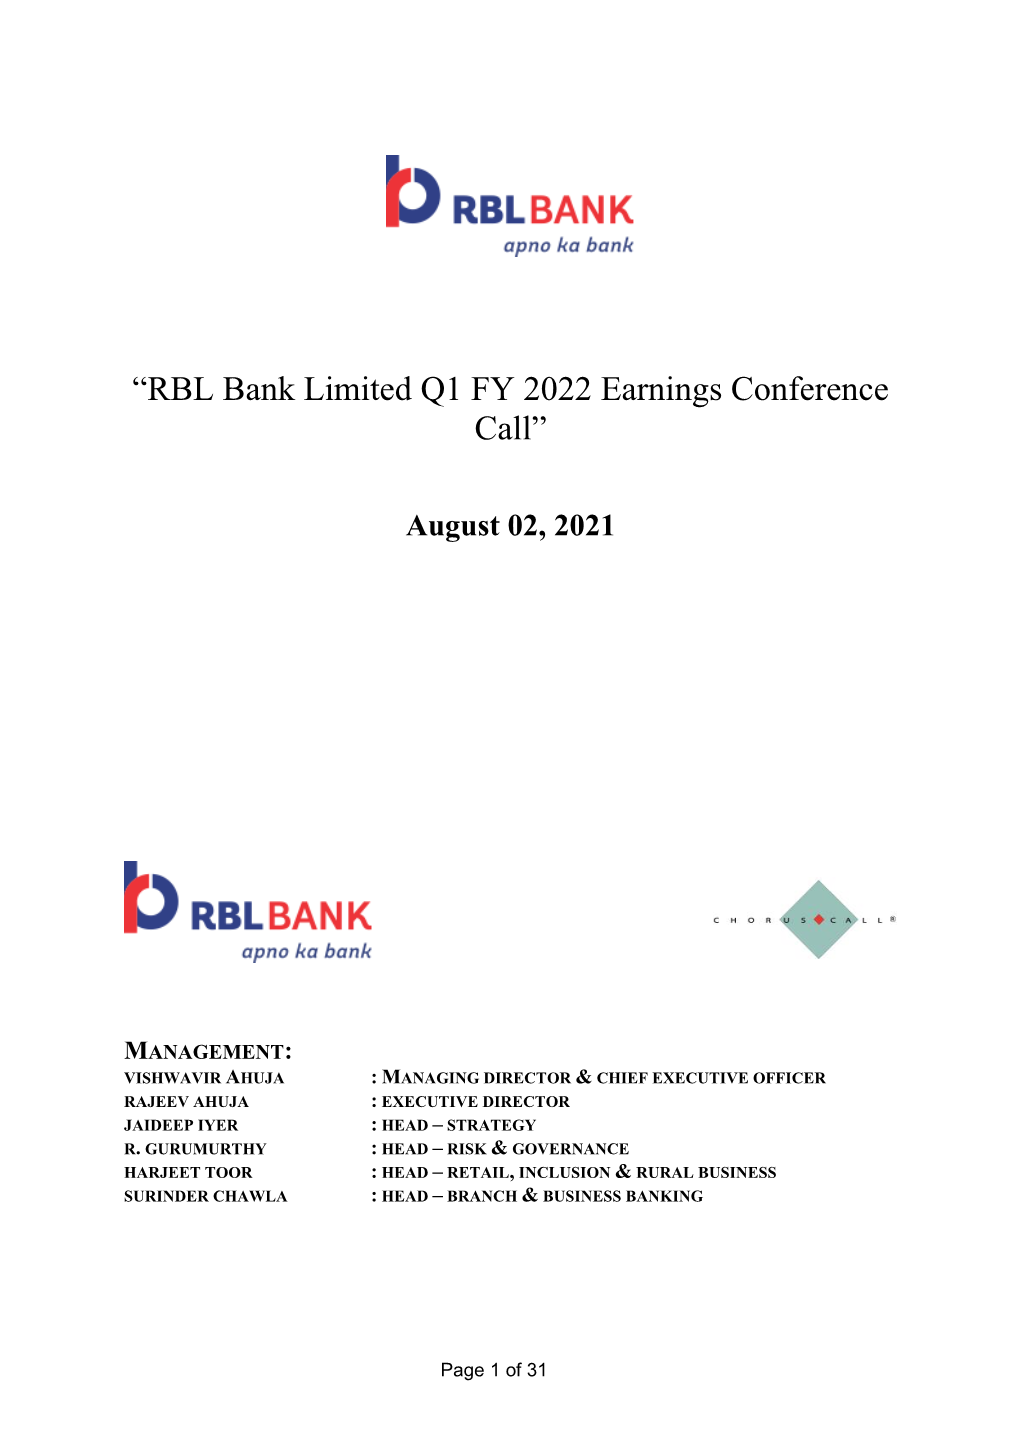 “RBL Bank Limited Q1 FY 2022 Earnings Conference Call”